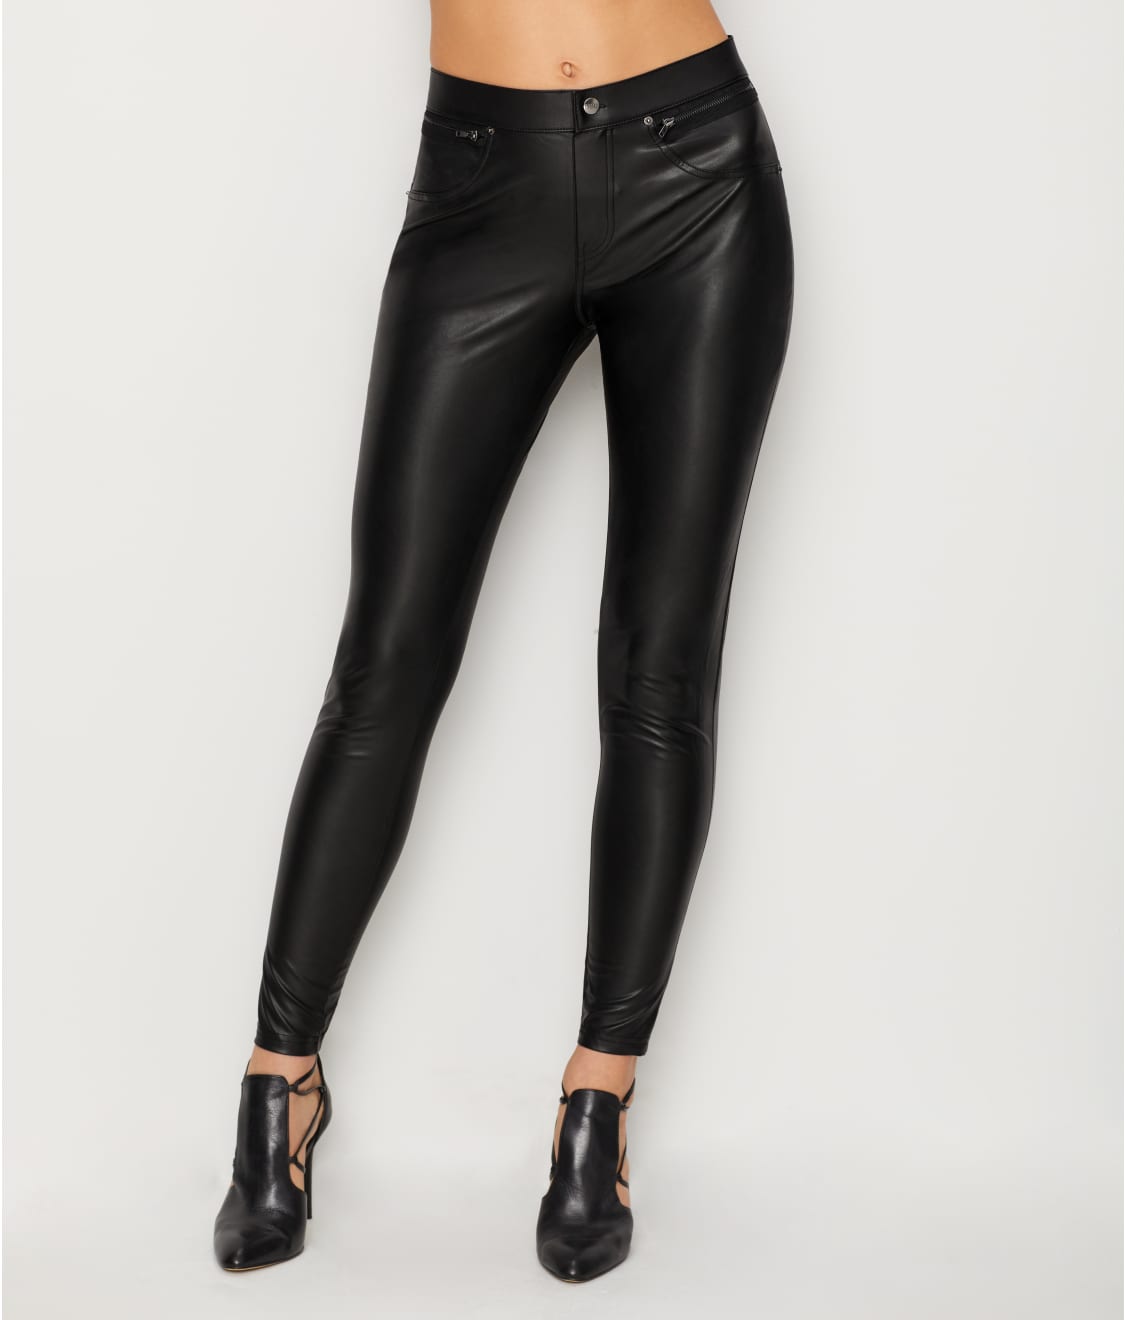 HUE Faux Leather Leggings & Reviews | Bare Necessities (Style U17979)